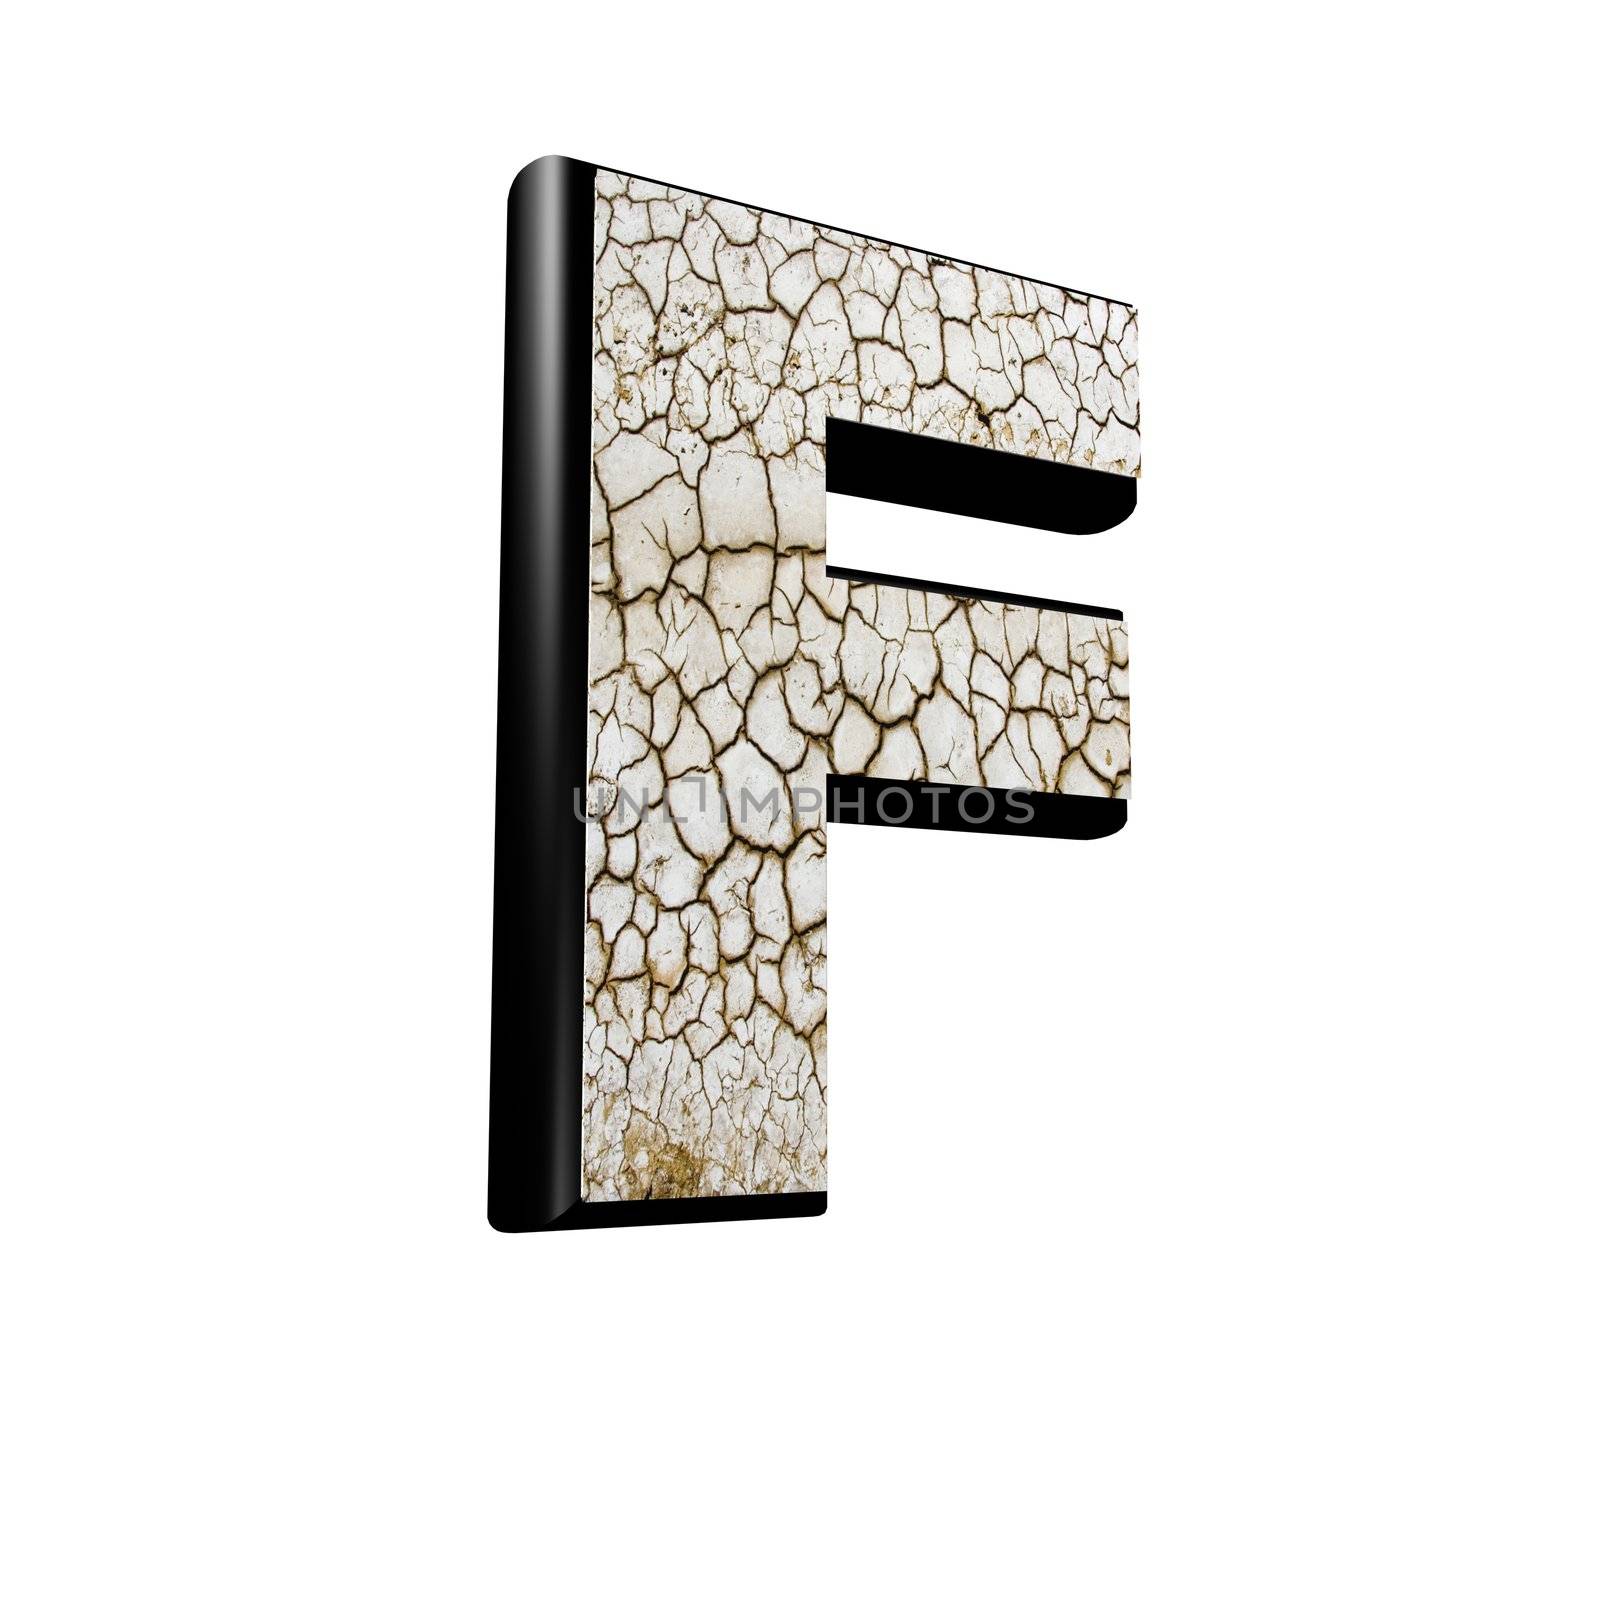 abstract 3d letter with dry ground texture - F by chrisroll